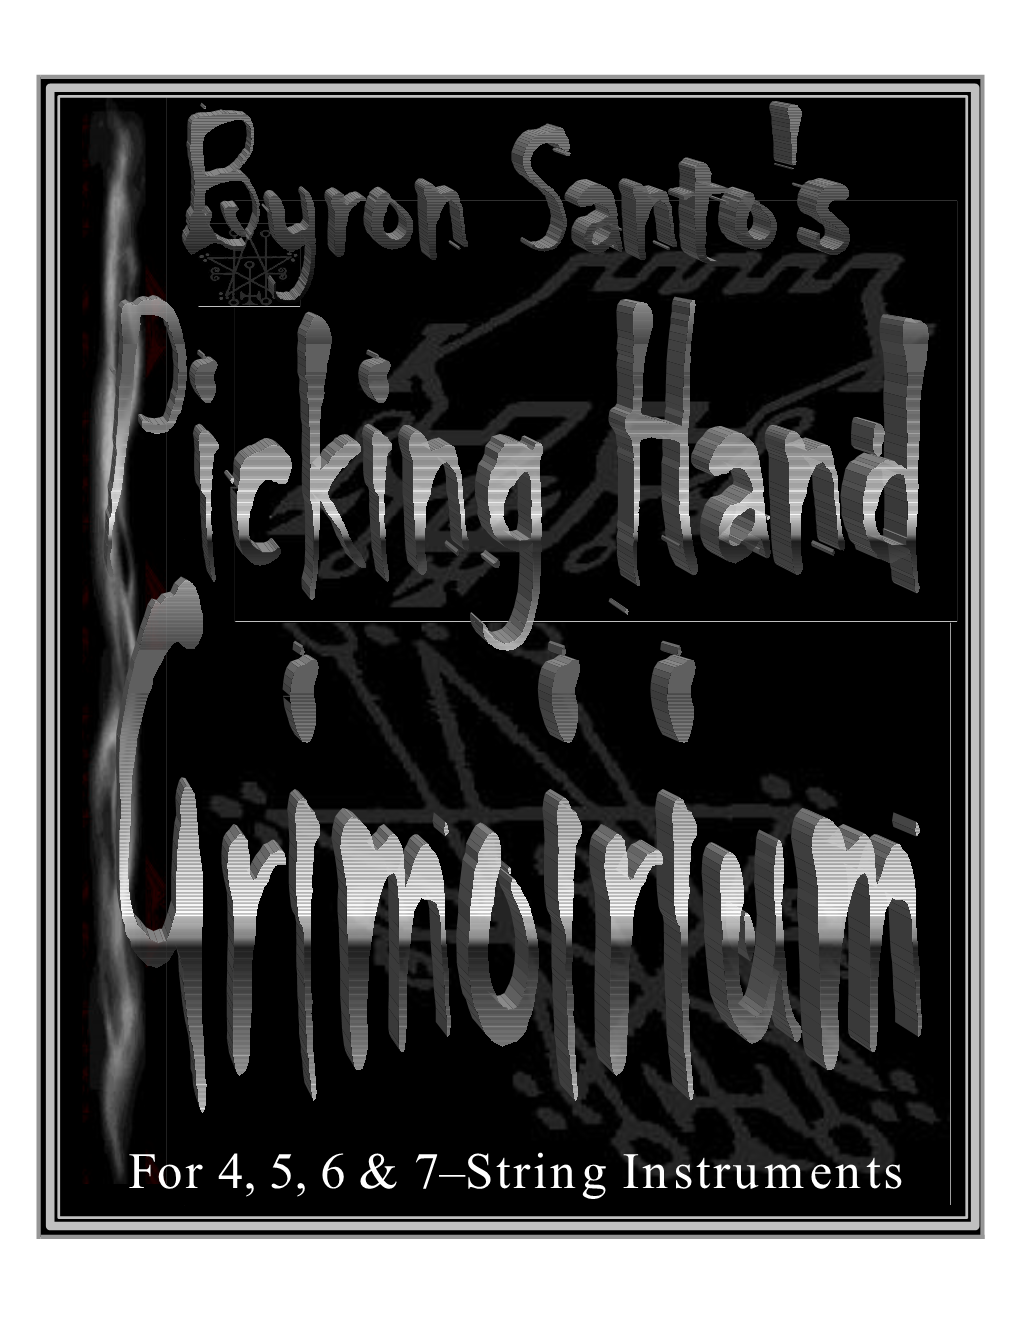 PICKING HAND GRIMOIRIUM by Byron Santo Is a Very Useful Working Tool for the Guitarist to Develop New Melodic Ideas and Compositional Insights and Directions